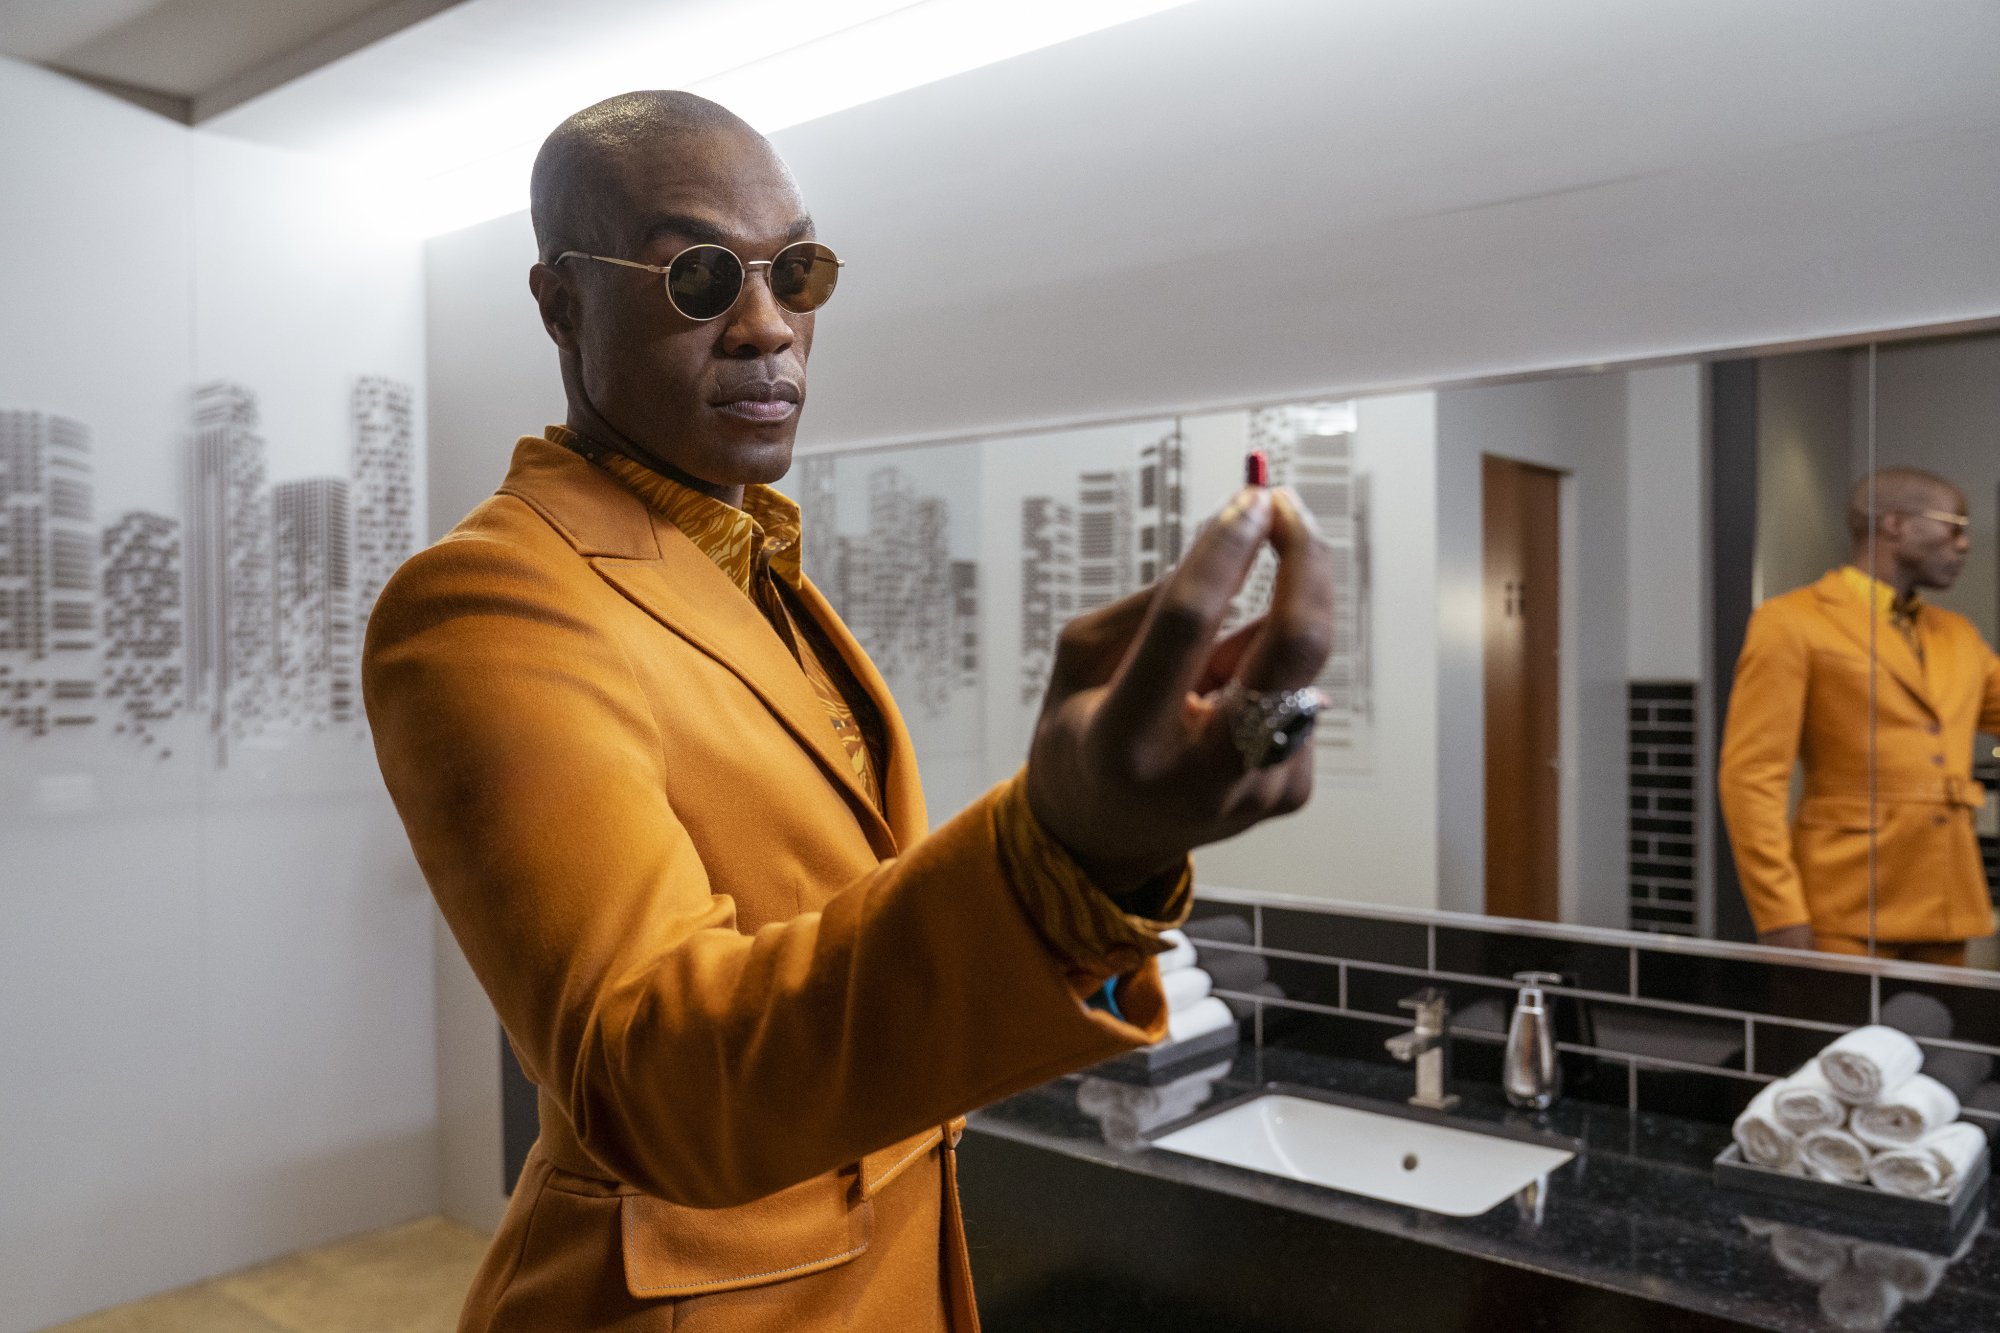 'The Matrix Resurrections' Yahya Abdul-Mateen II as Morpheus wearing a yellow suit holding a red pill in a bathroom